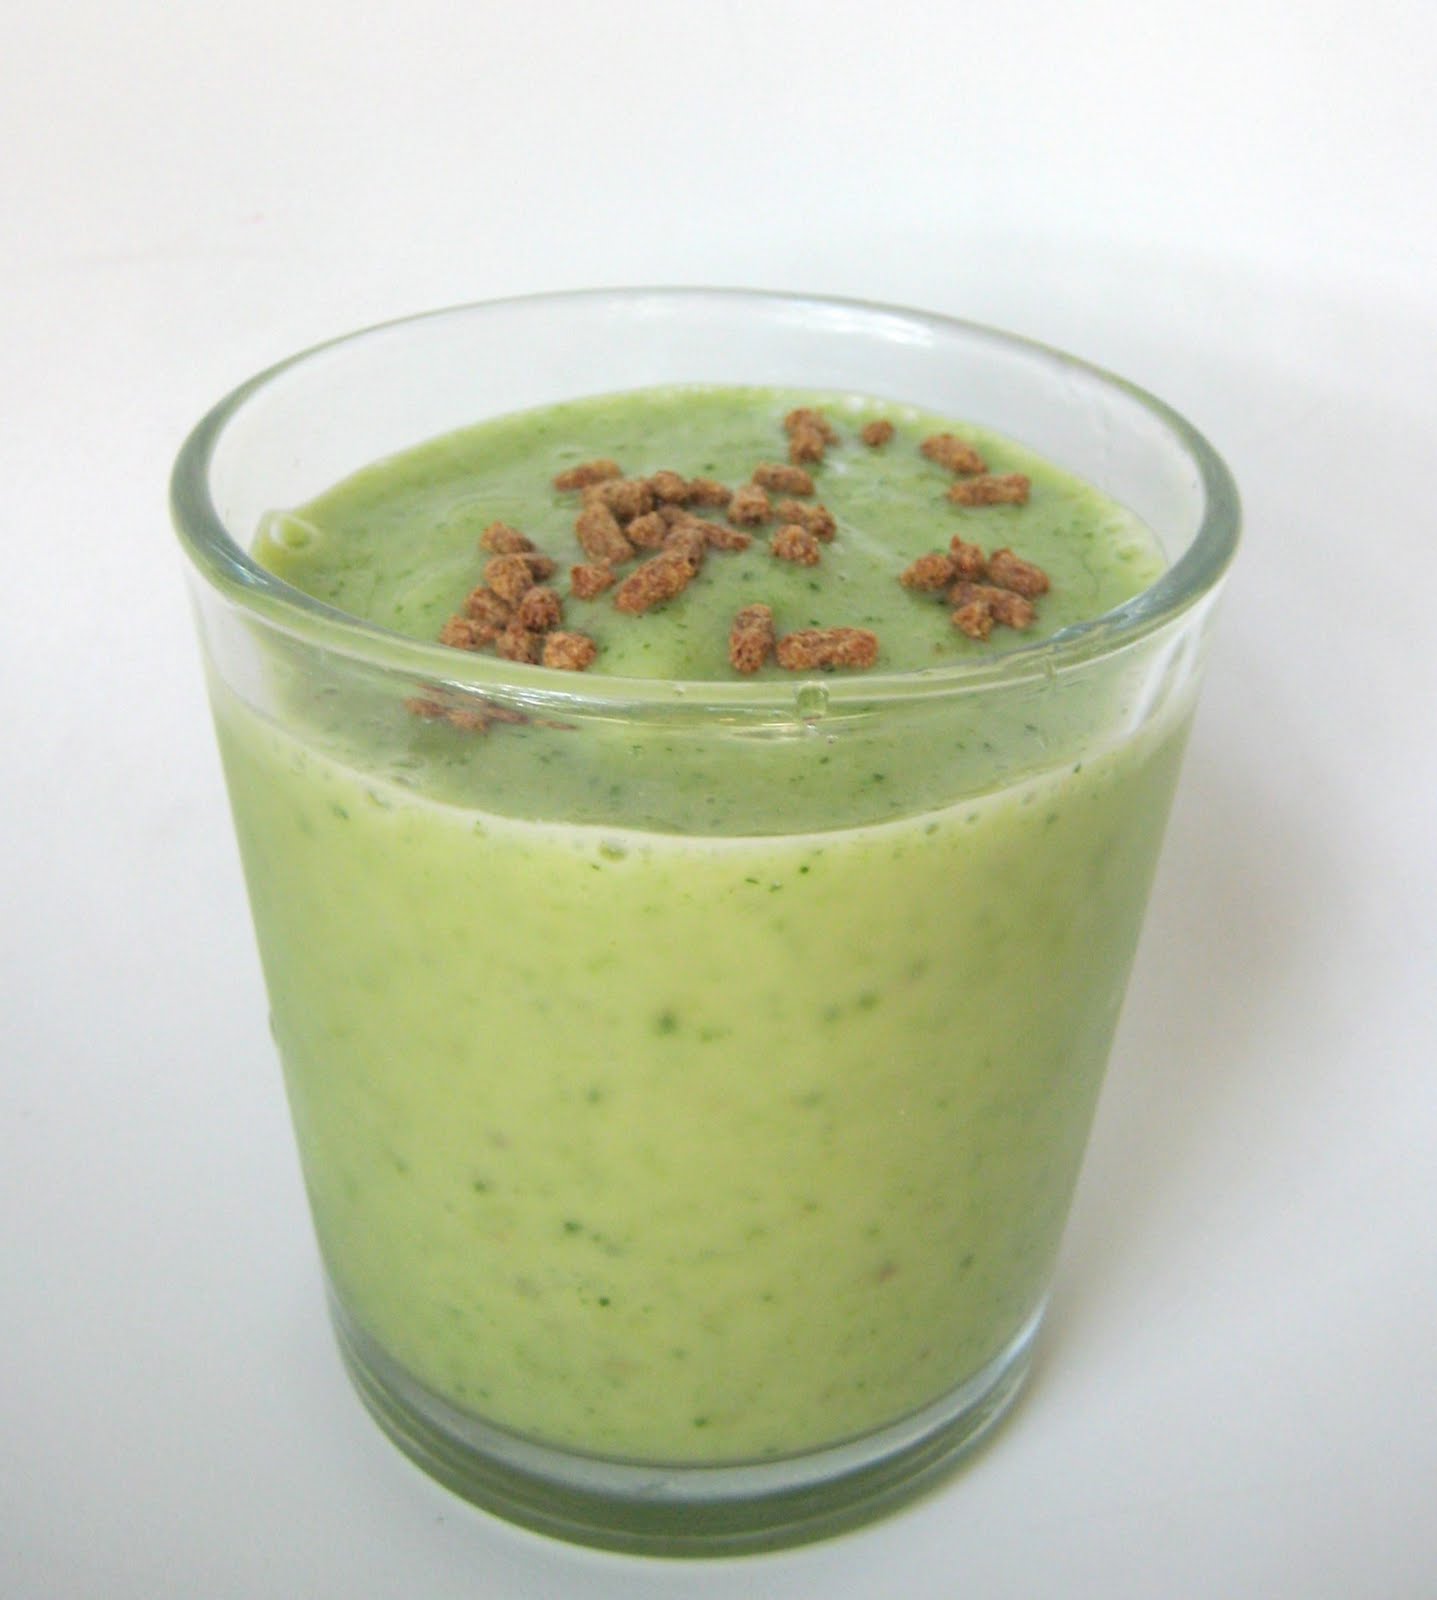 Green smoothie for St. Patrick's Day